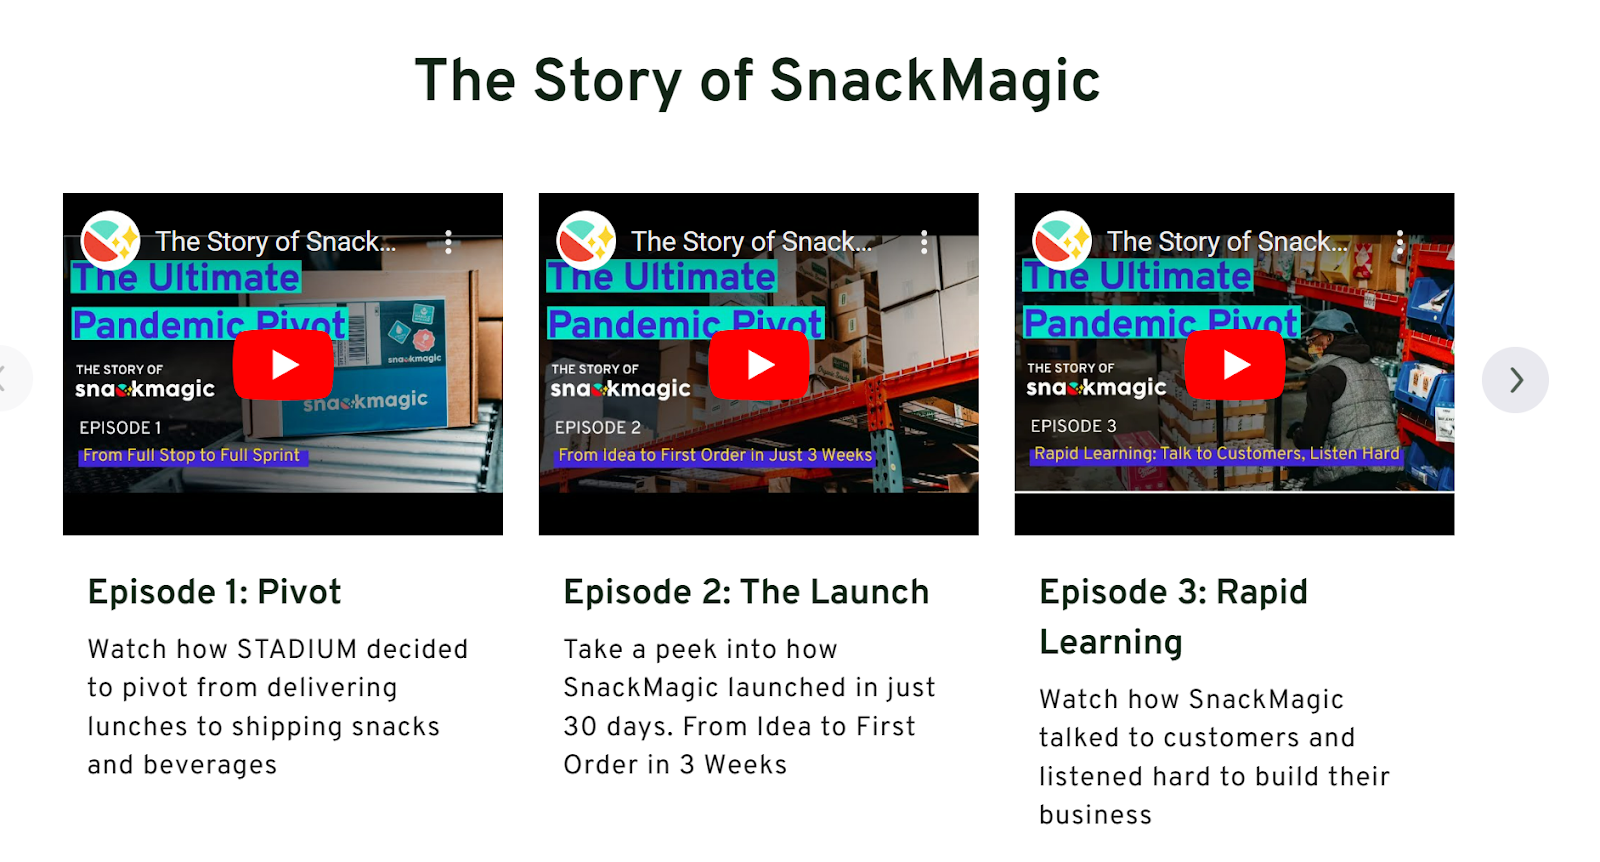 Episodes on SwagMagic's About Us page
